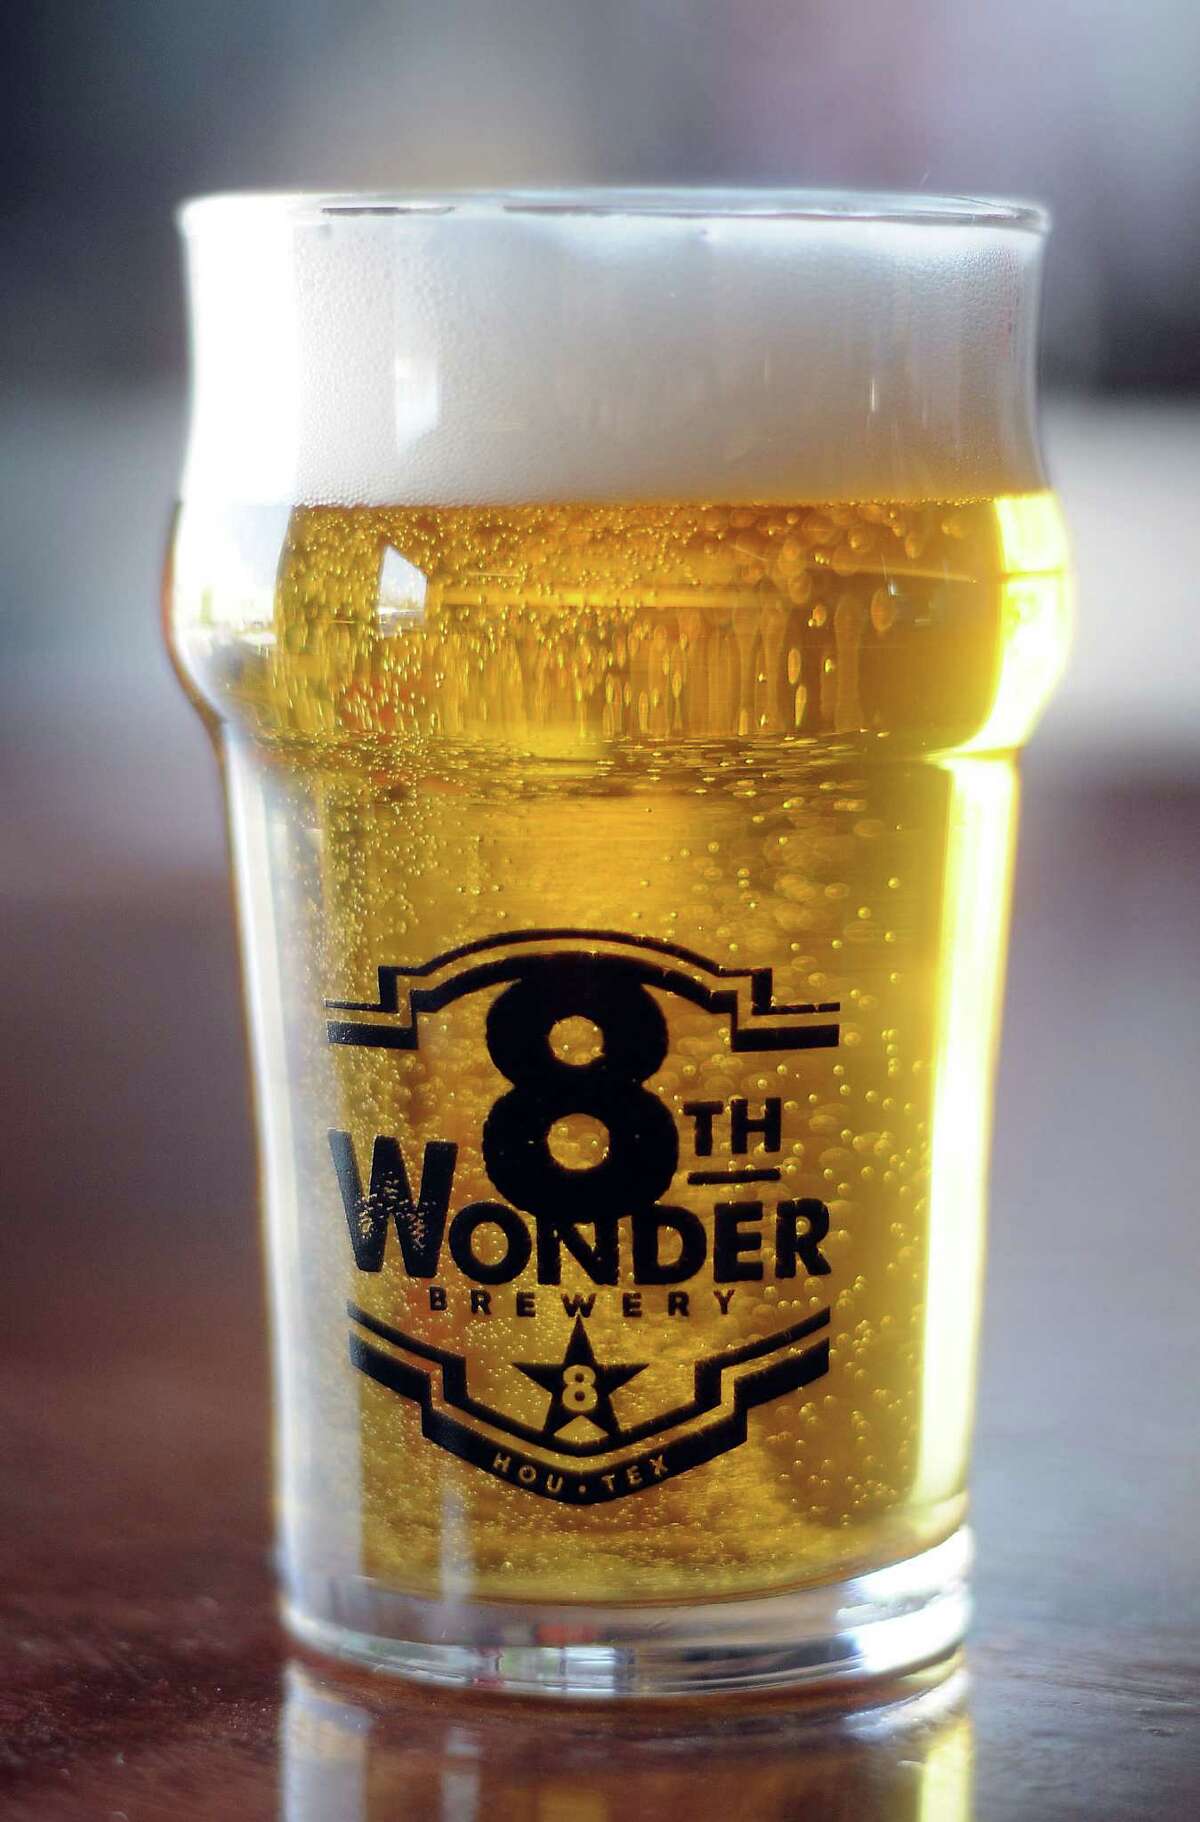 Fresh product at the 8th Wonder Brewery on Dallas St. Thursday March 6, 2014.(Dave Rossman photo)